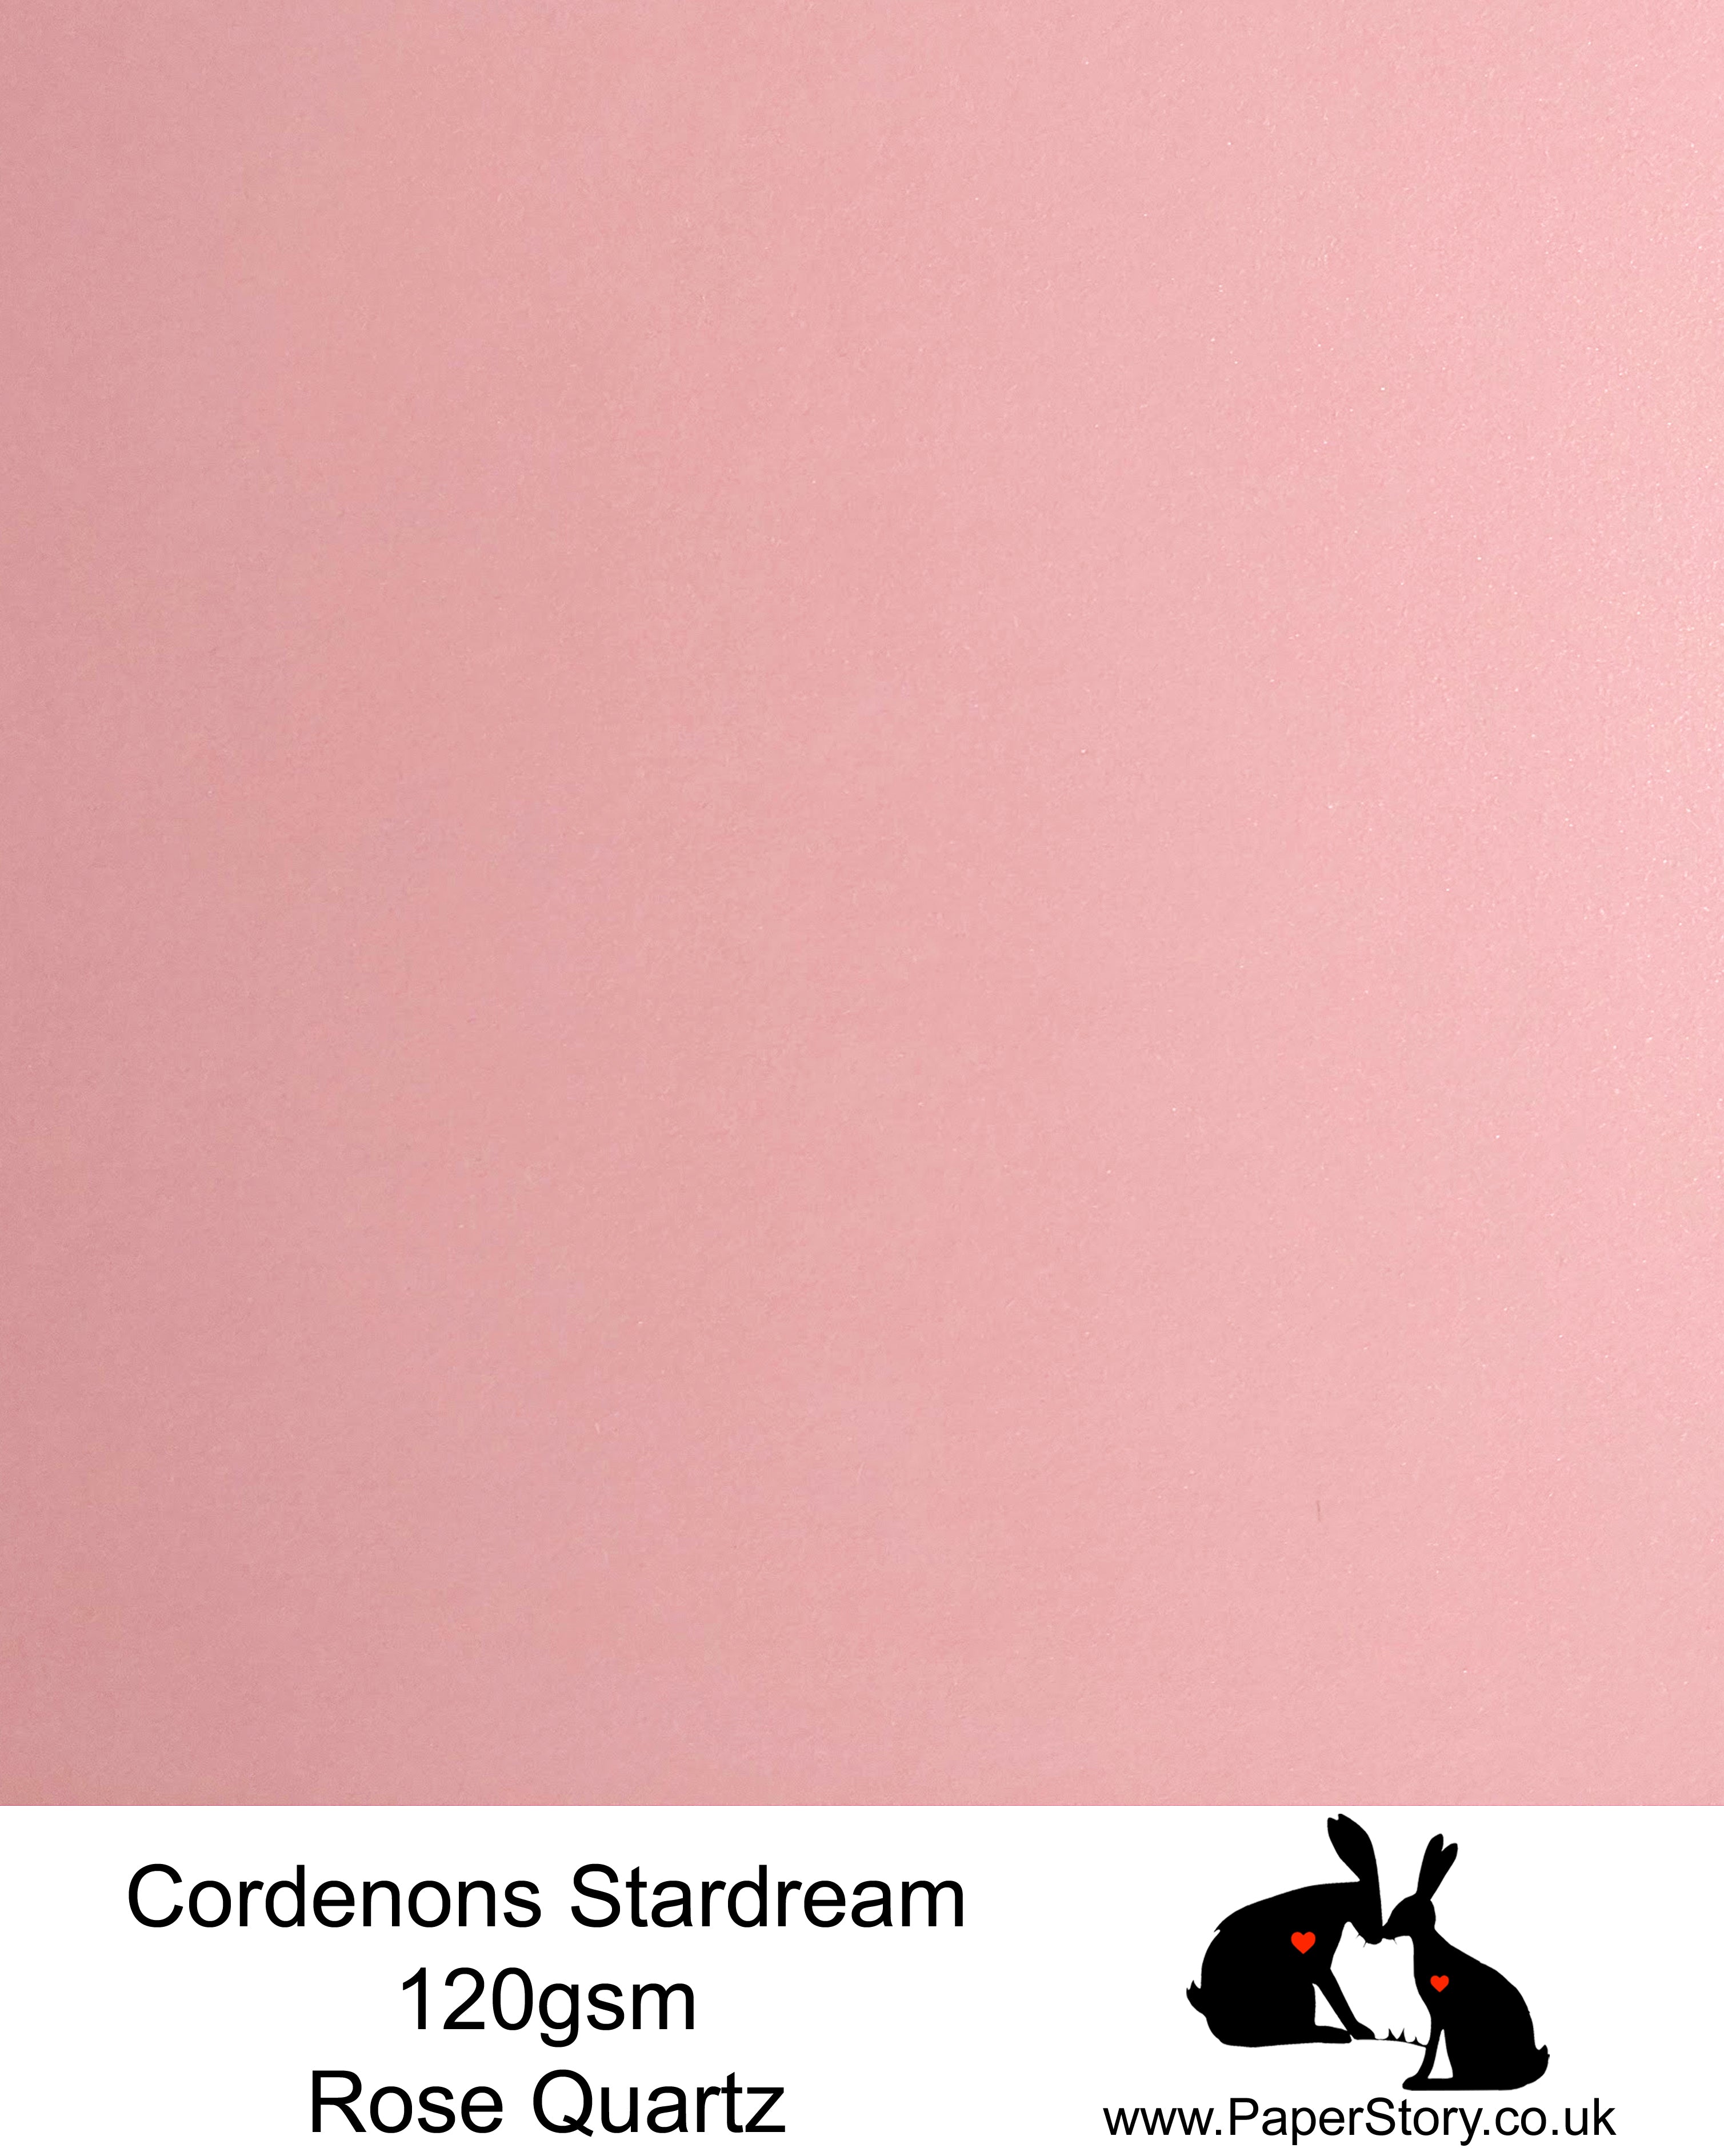 A4 Stardream 120gsm paper for Papercutting, craft, flower making  and wedding stationery. Rose Quartz, is a subtle soft rose pink. Perfect for paper flower making and wedding invitations. Stardream is a luxury Italian paper from Italy, it is a double sided quality Pearlescent paper with a matching colour core. FSC Certified, acid free, archival and PH Neutral